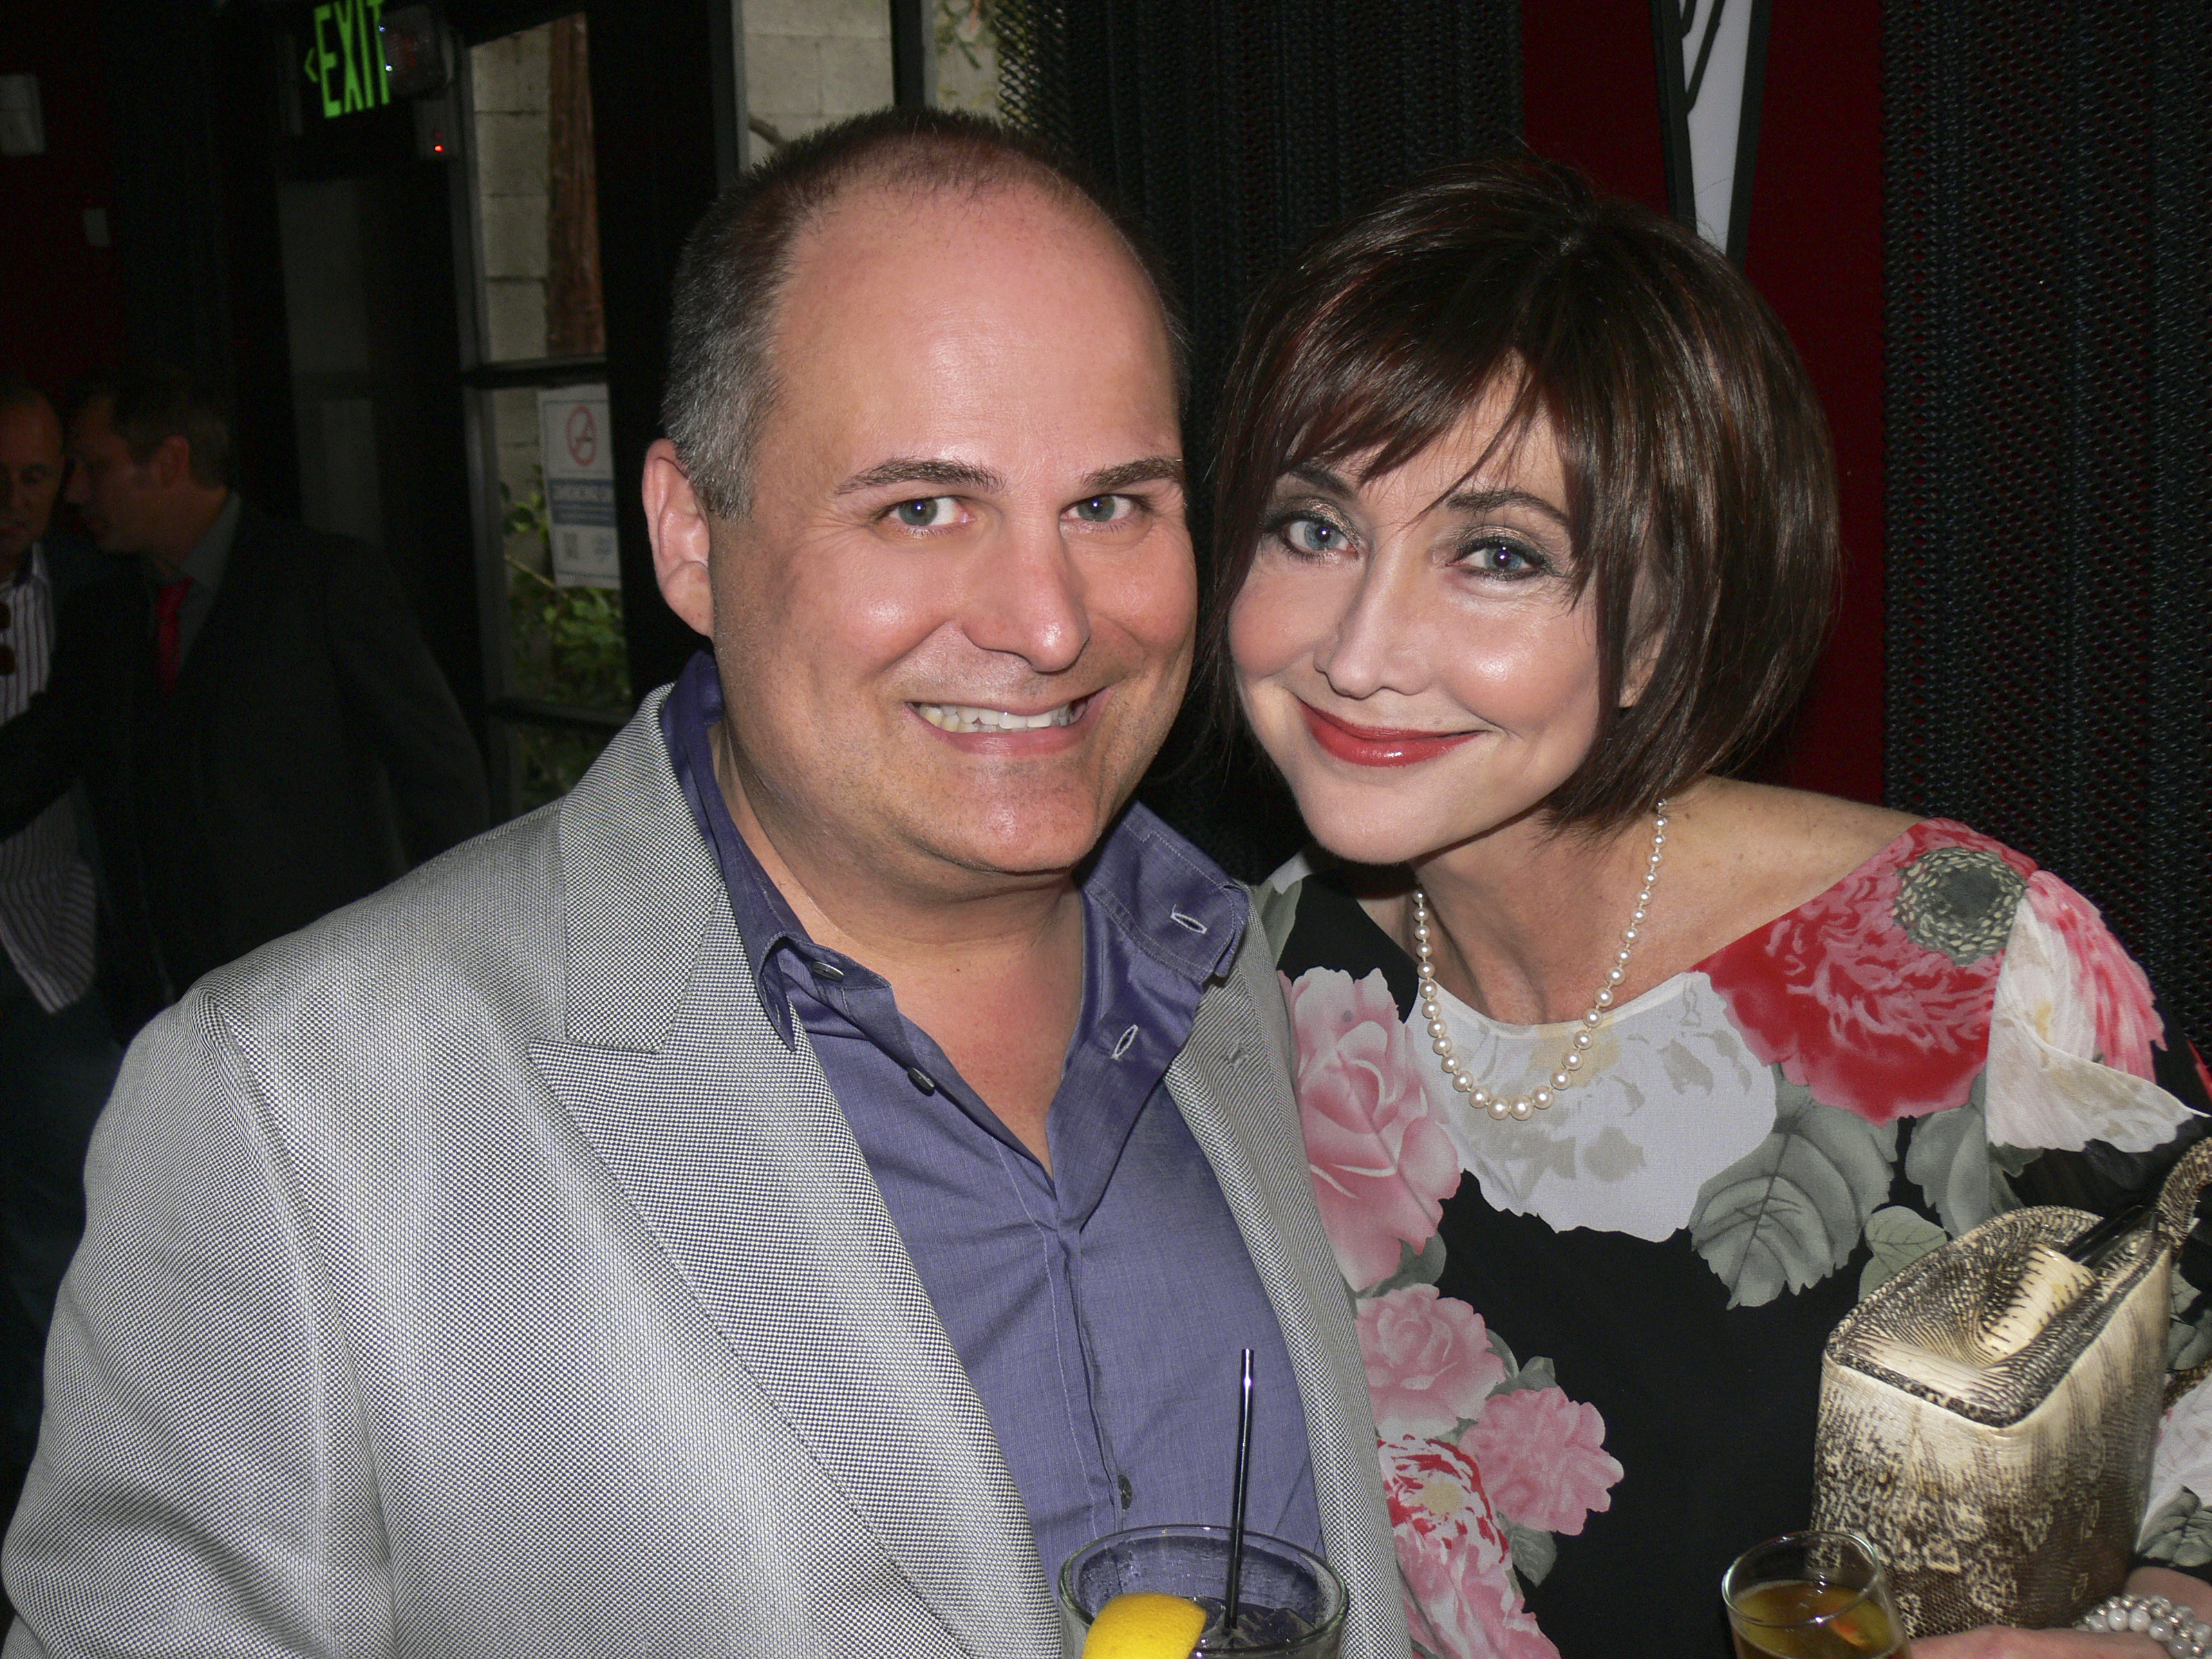 Brian Edwards and Pam Tillis at The International Press Academy Event Honoring Brian Edwards, 02 May 2012, Los Angeles, CA